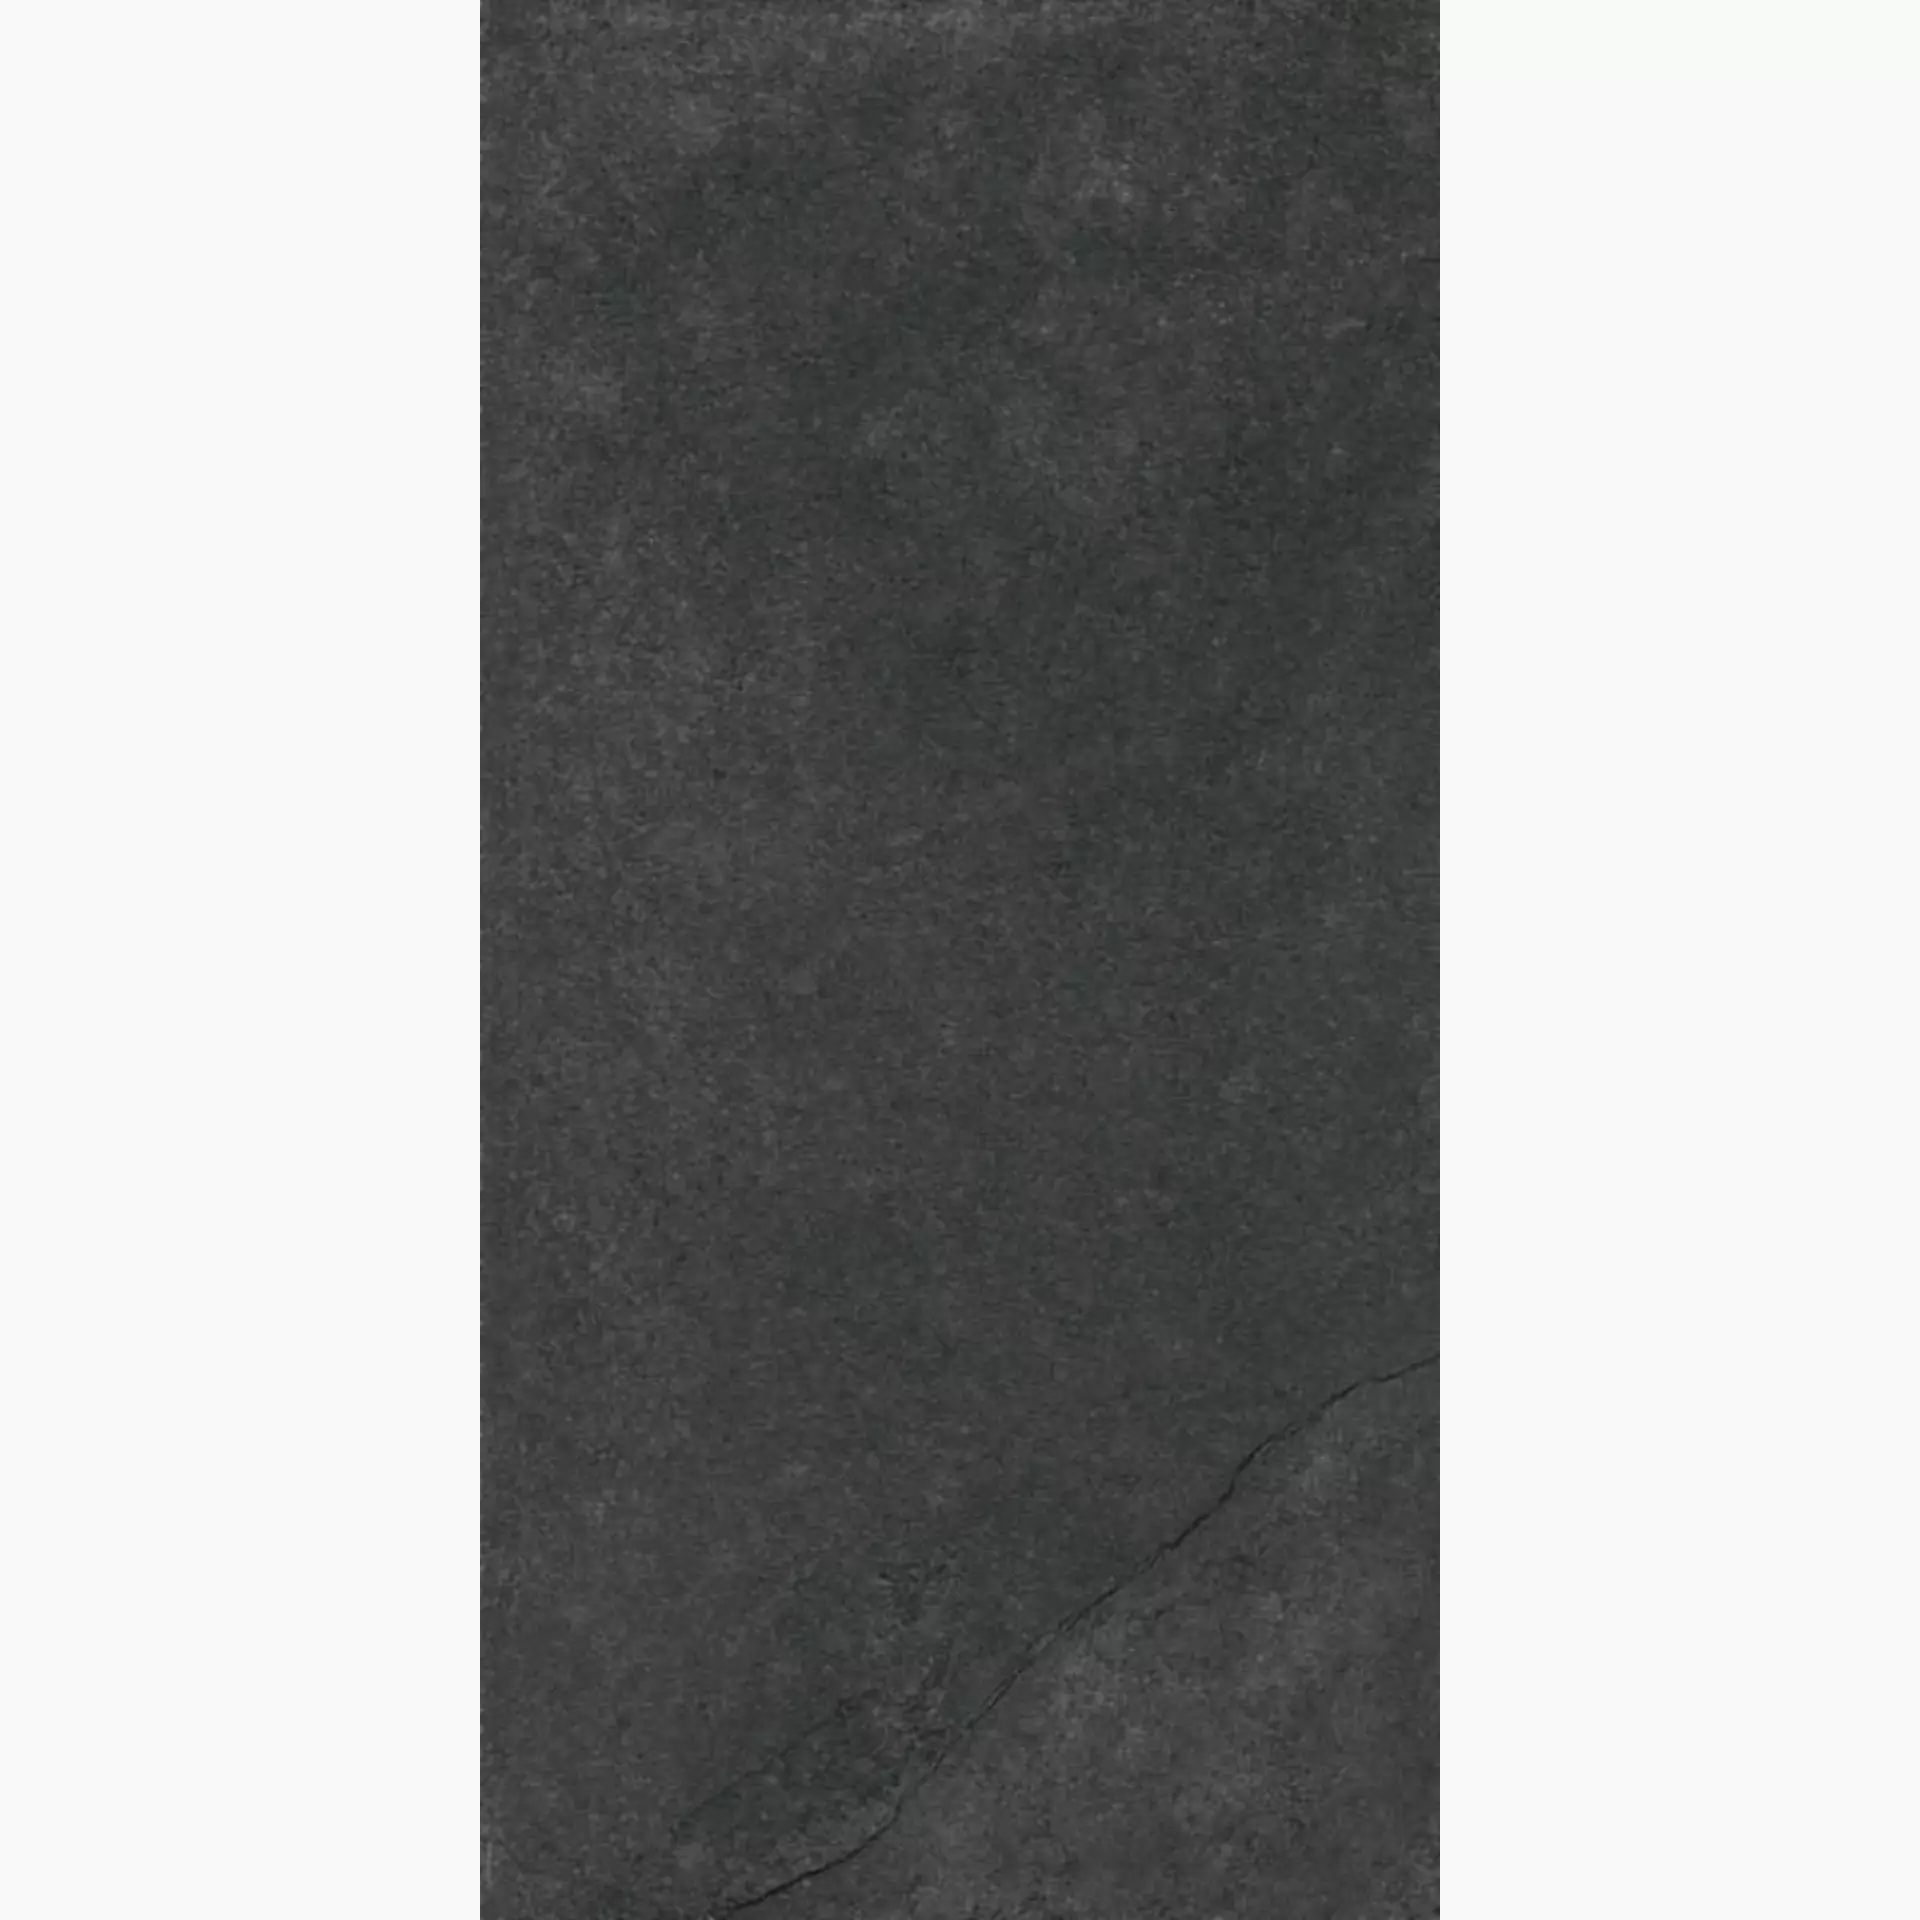 Sant Agostino Unionstone Mustang Natural CSAMSTNG30 30x60cm rectified 10mm